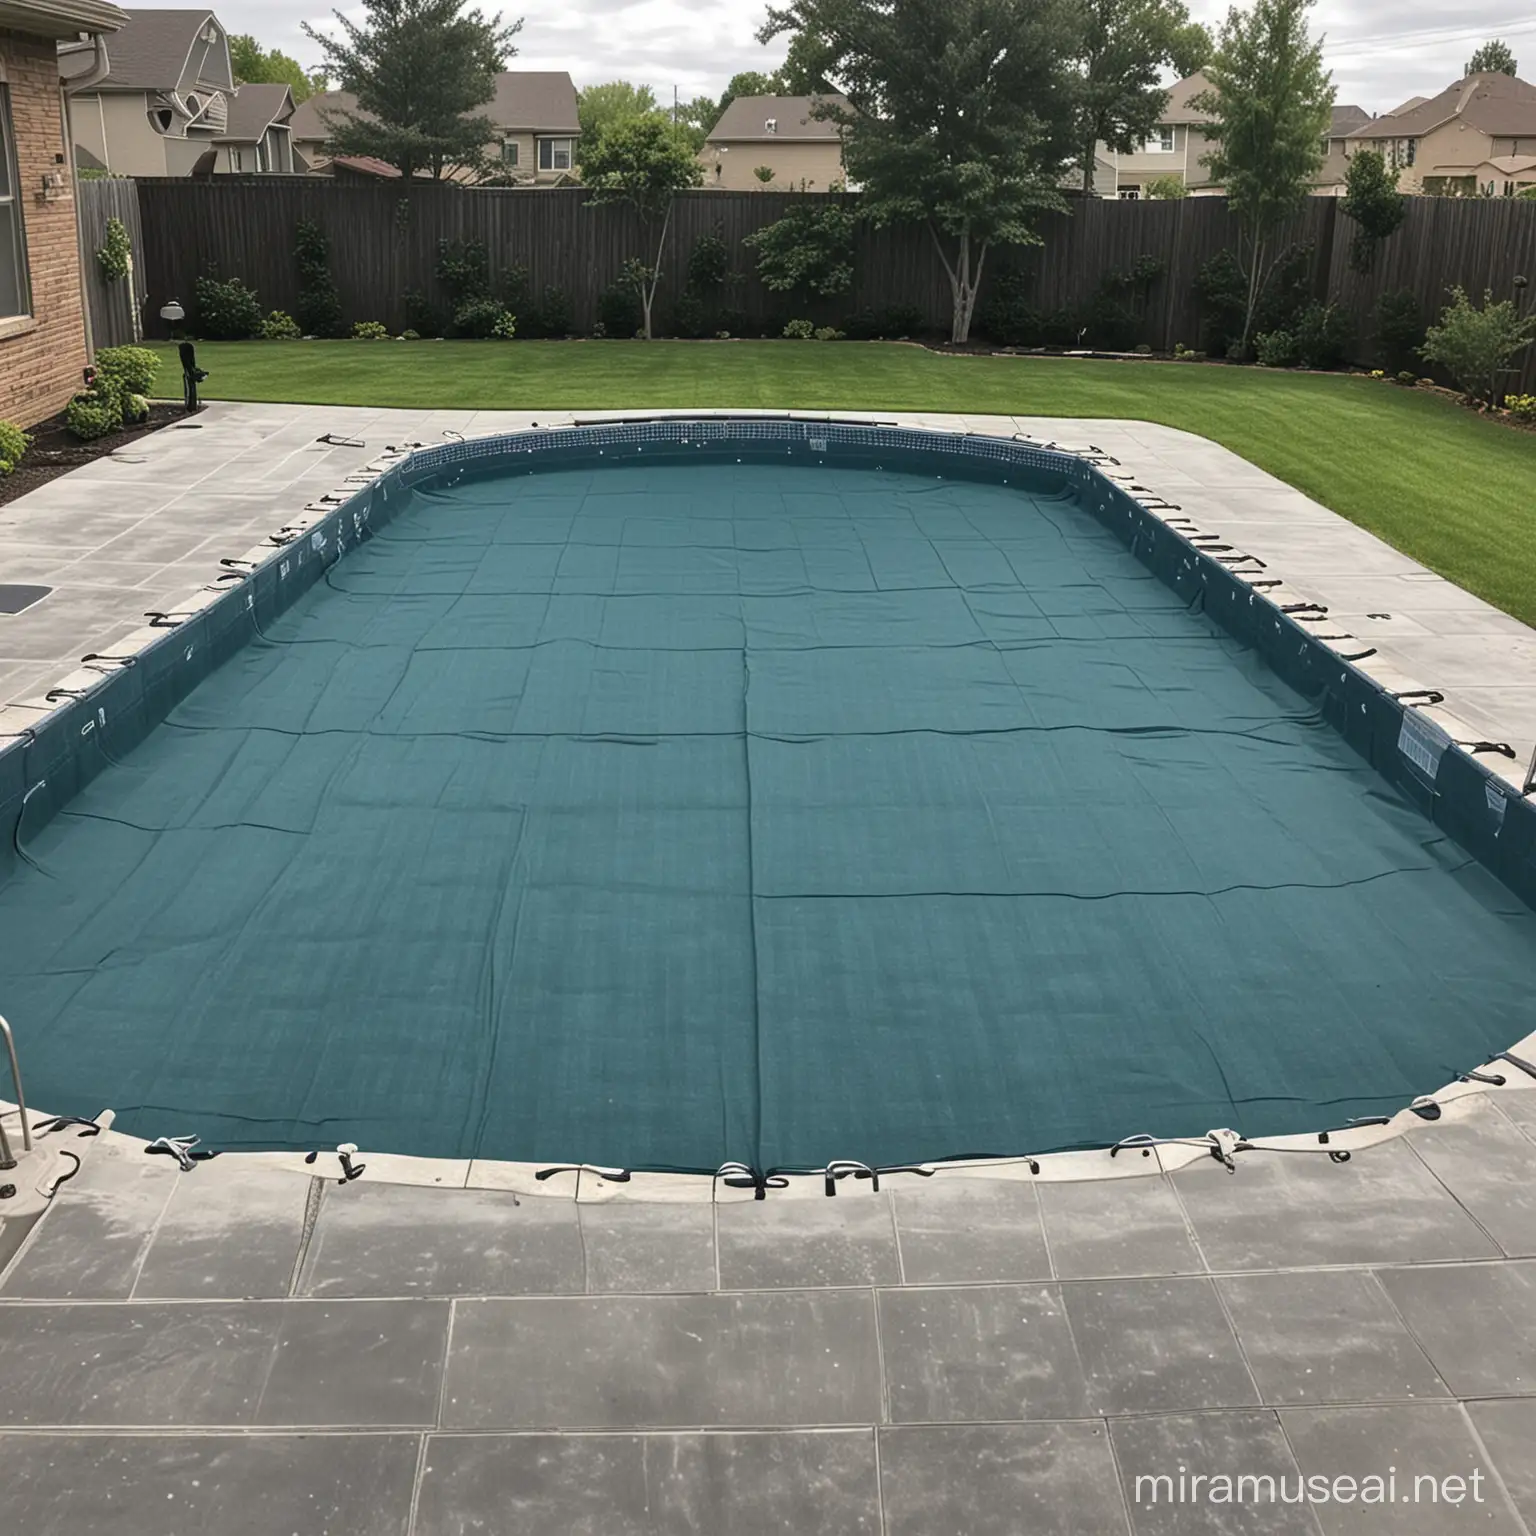 a high-quality pool cover on an inground pool